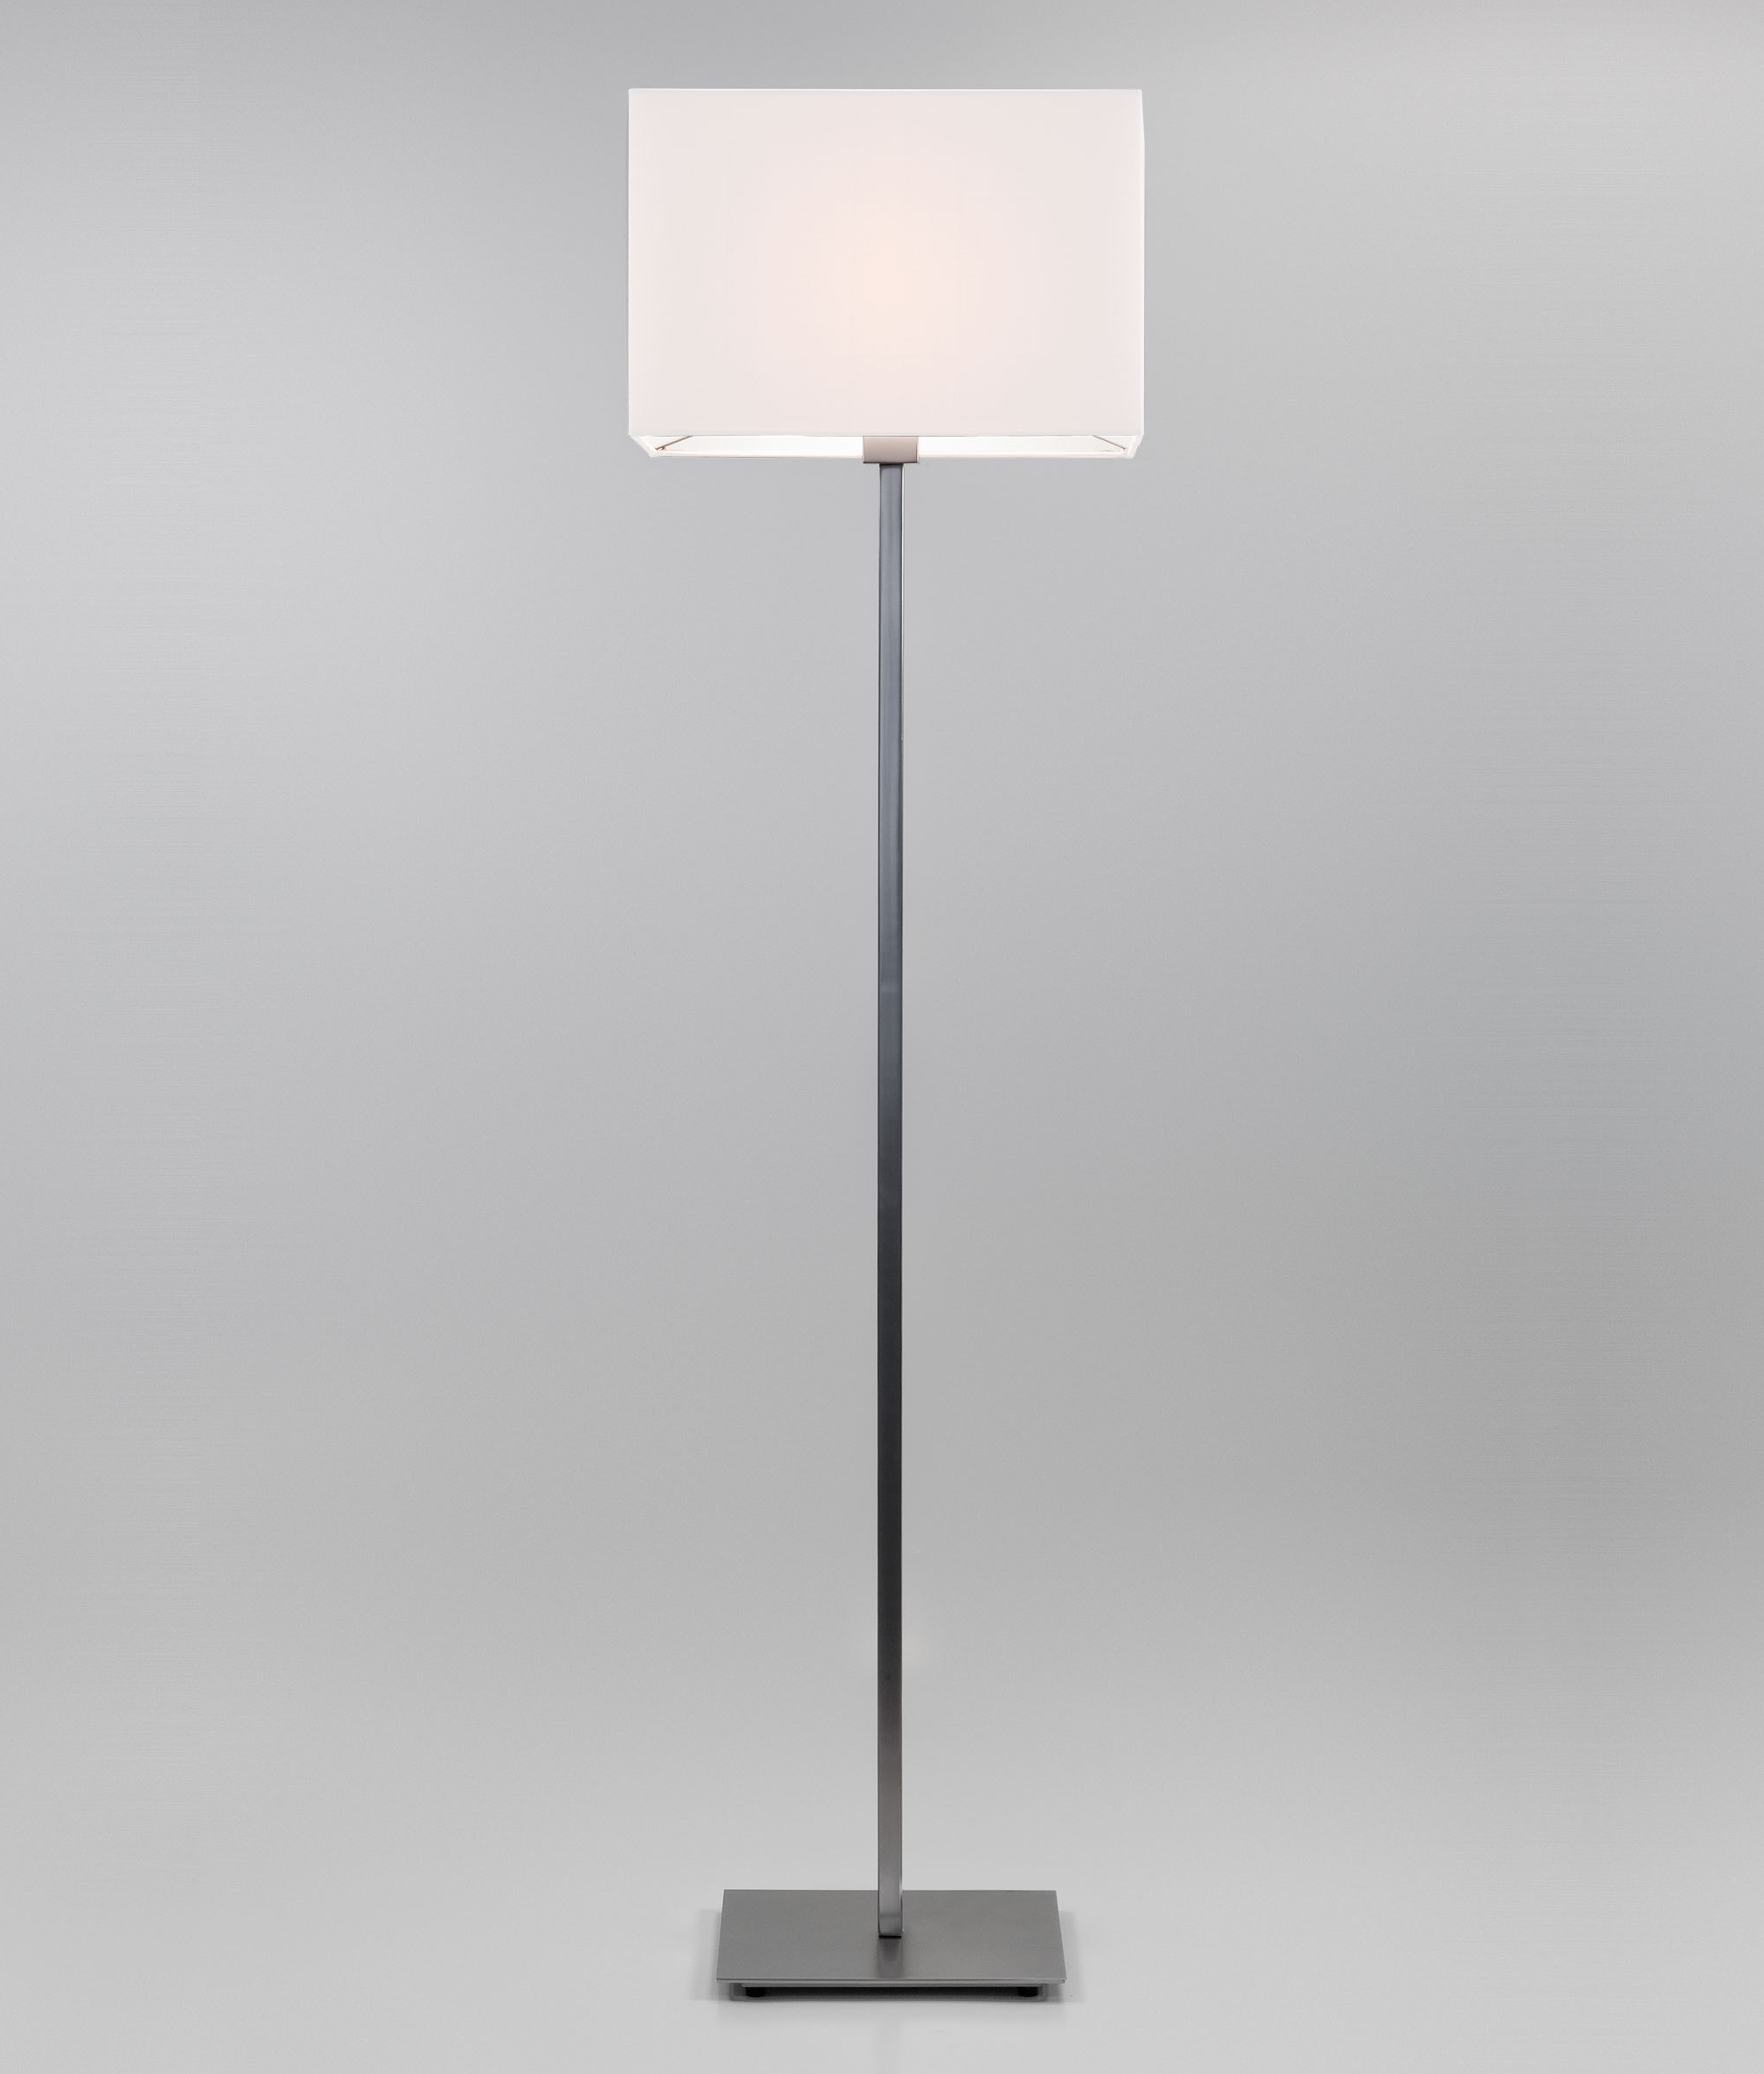 Floor Standing Lamp With A Square Stem, Square Floor Lamp Shade